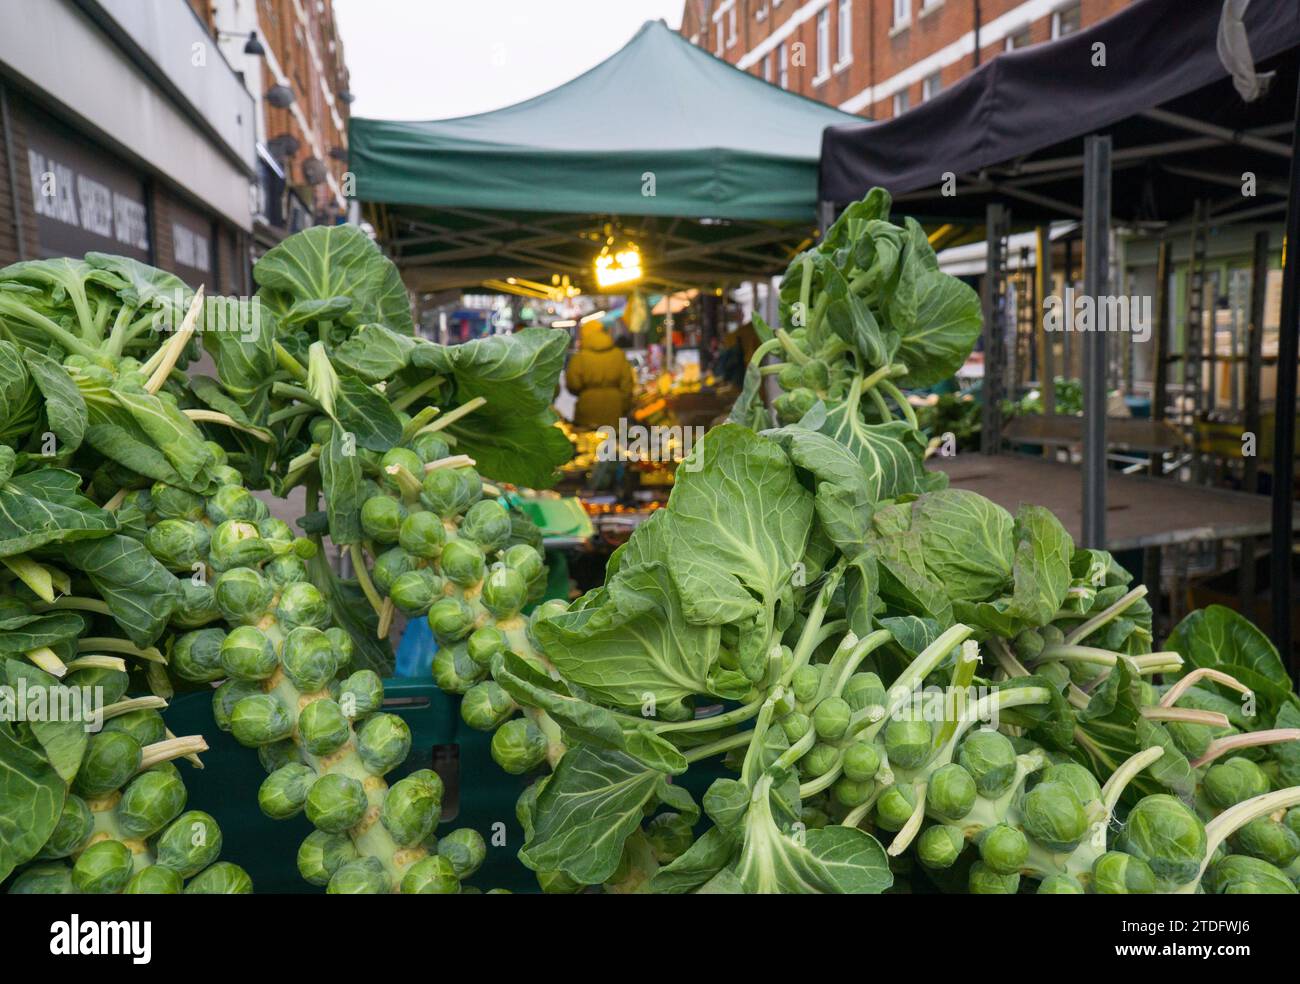 London, UK. 18th Jan, 2023. At a fruit and veg stall on Hildreth Street Brussels spouts on stalks are for sale. Credit: Anna Watson/Alamy Live News Stock Photo